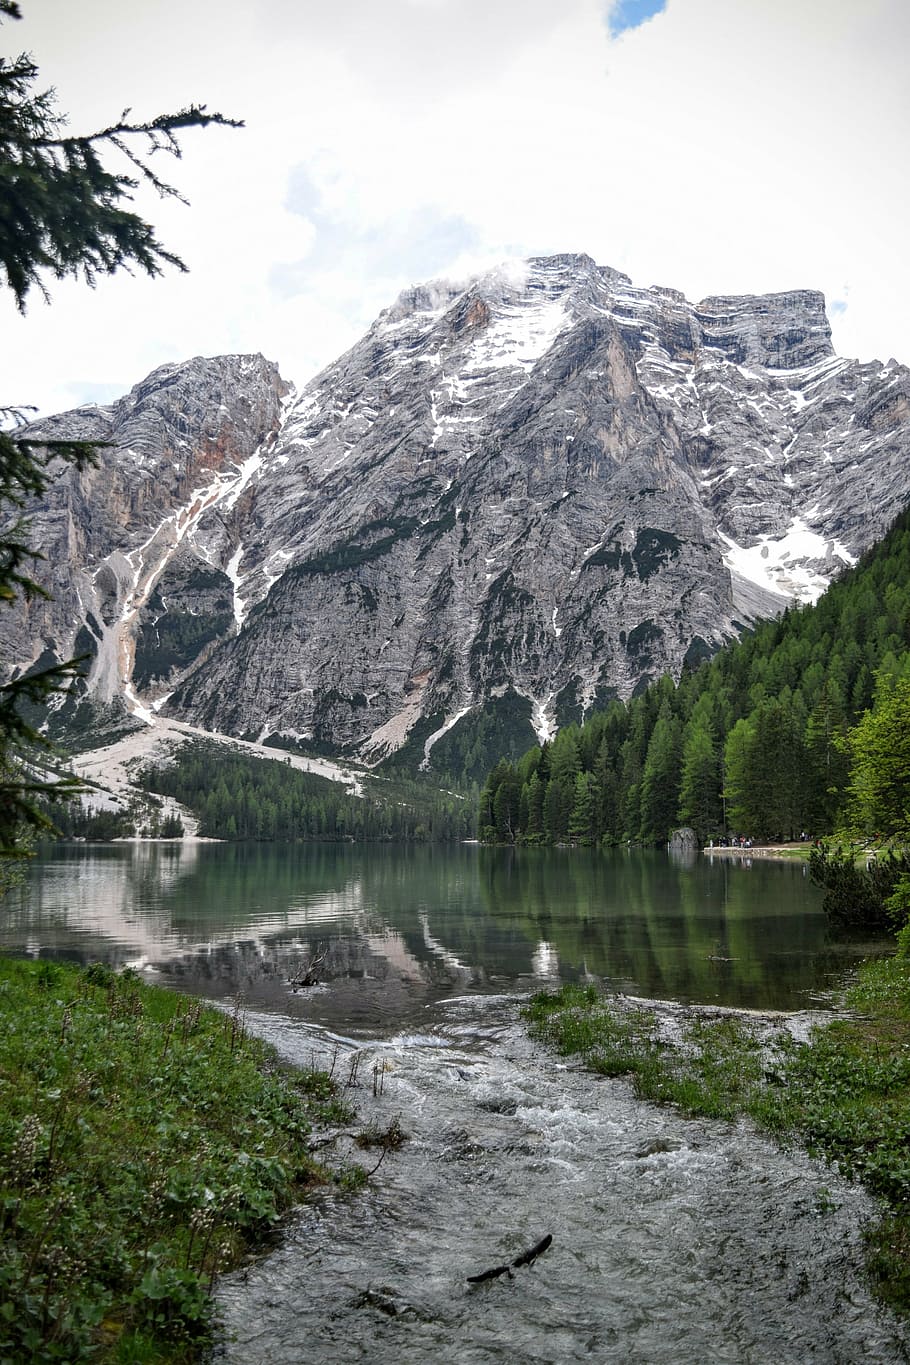 lake braies, weekend, background, nature, tranquility, landscape